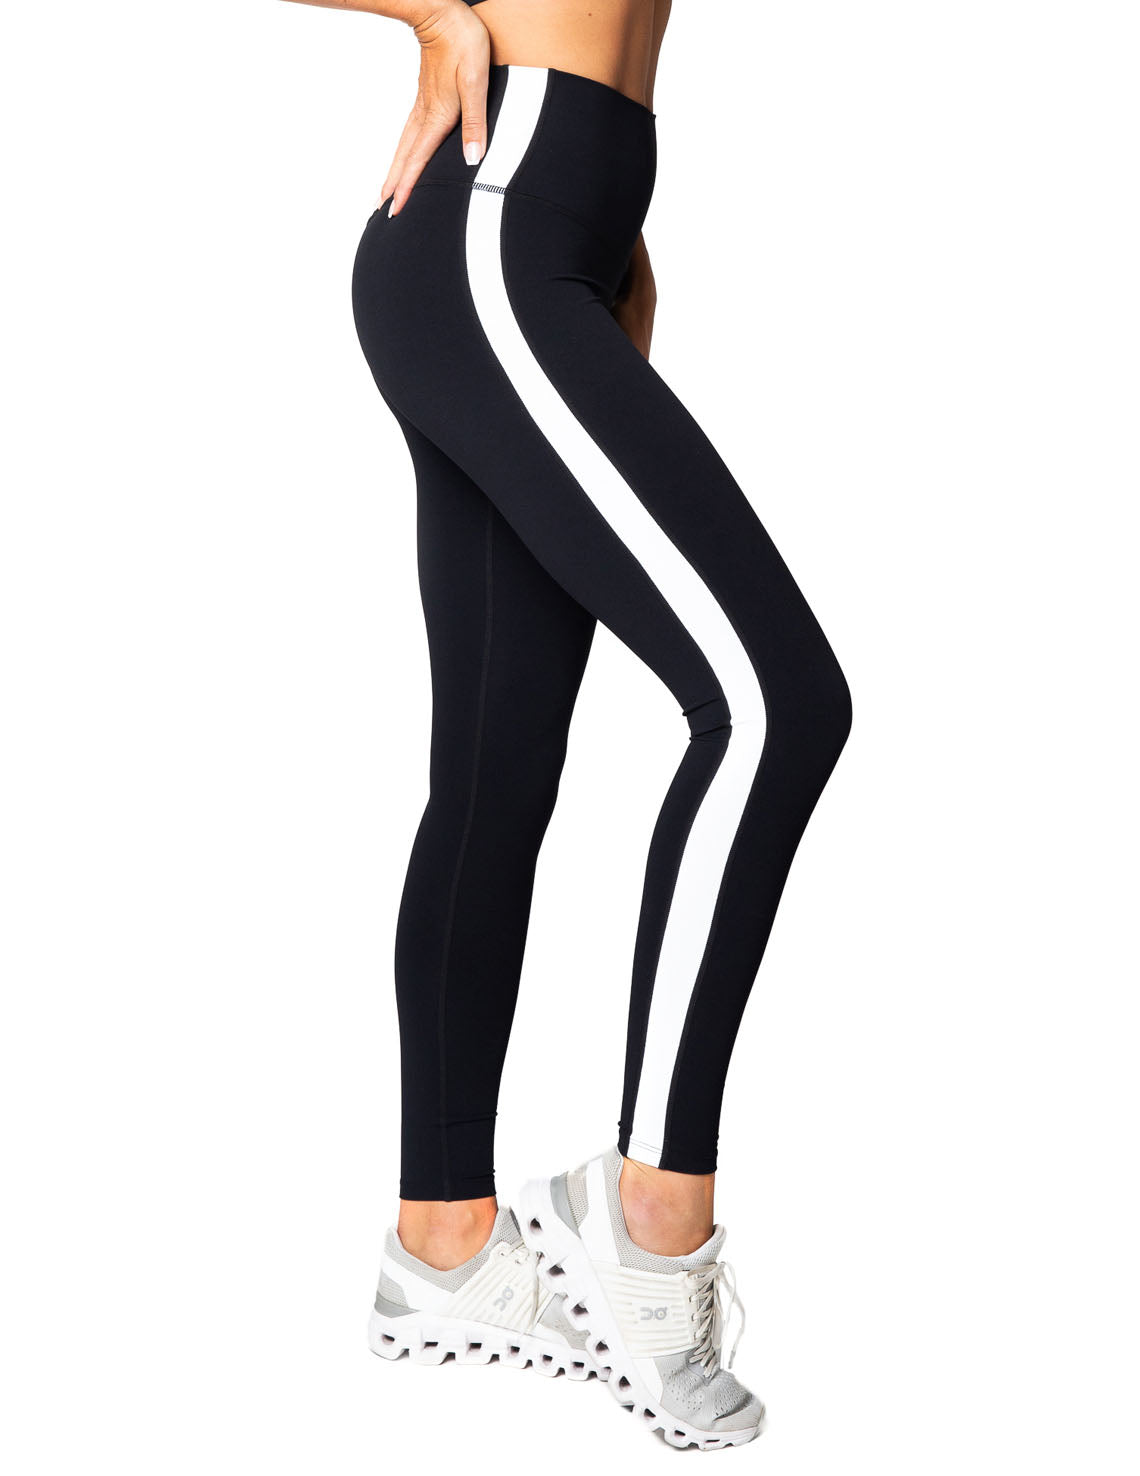 Wholesale Black Leggings With Blue Piped Side Stripes